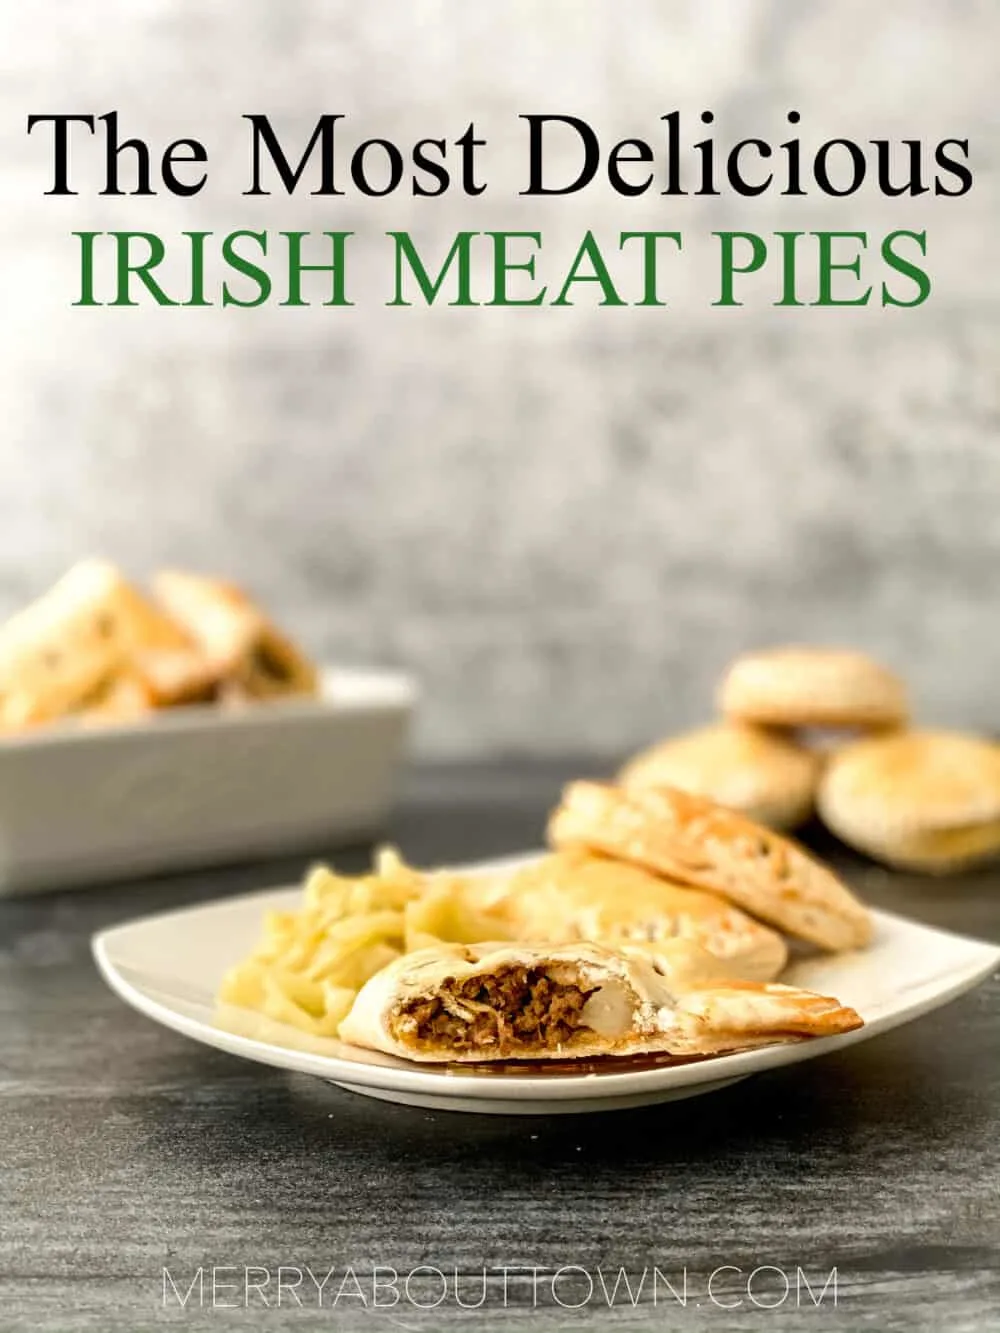 It’s your lucky day - these Irish Meat Pies are just what you need for this year’s St. Patrick’s Day celebration. Learn how to make them with my easy-to-follow recipe tutorial!